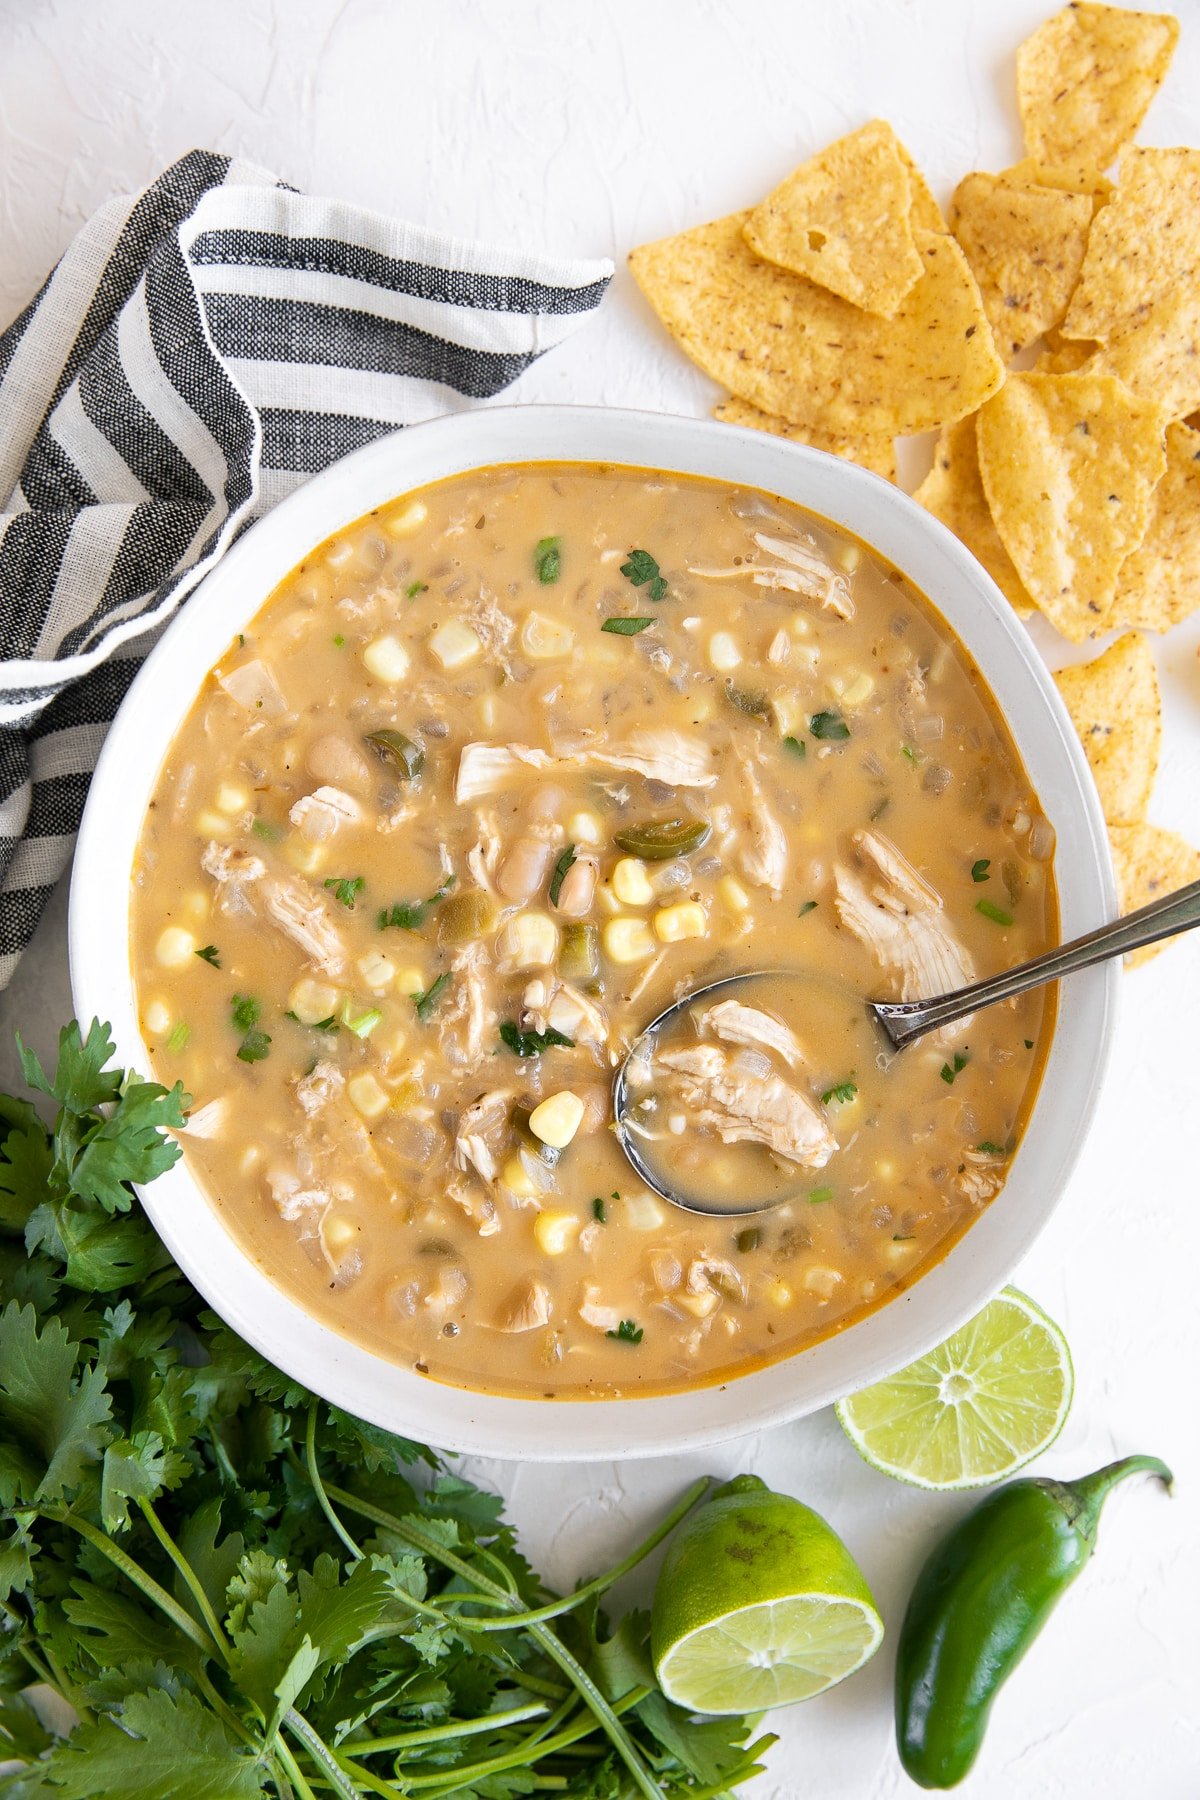 White shallow soup bowl surrounded by fresh cilantro, limes, and tortilla chips filled with creamy white chicken chili garnished wit crushed corn tortilla chips and chopped cilantro.